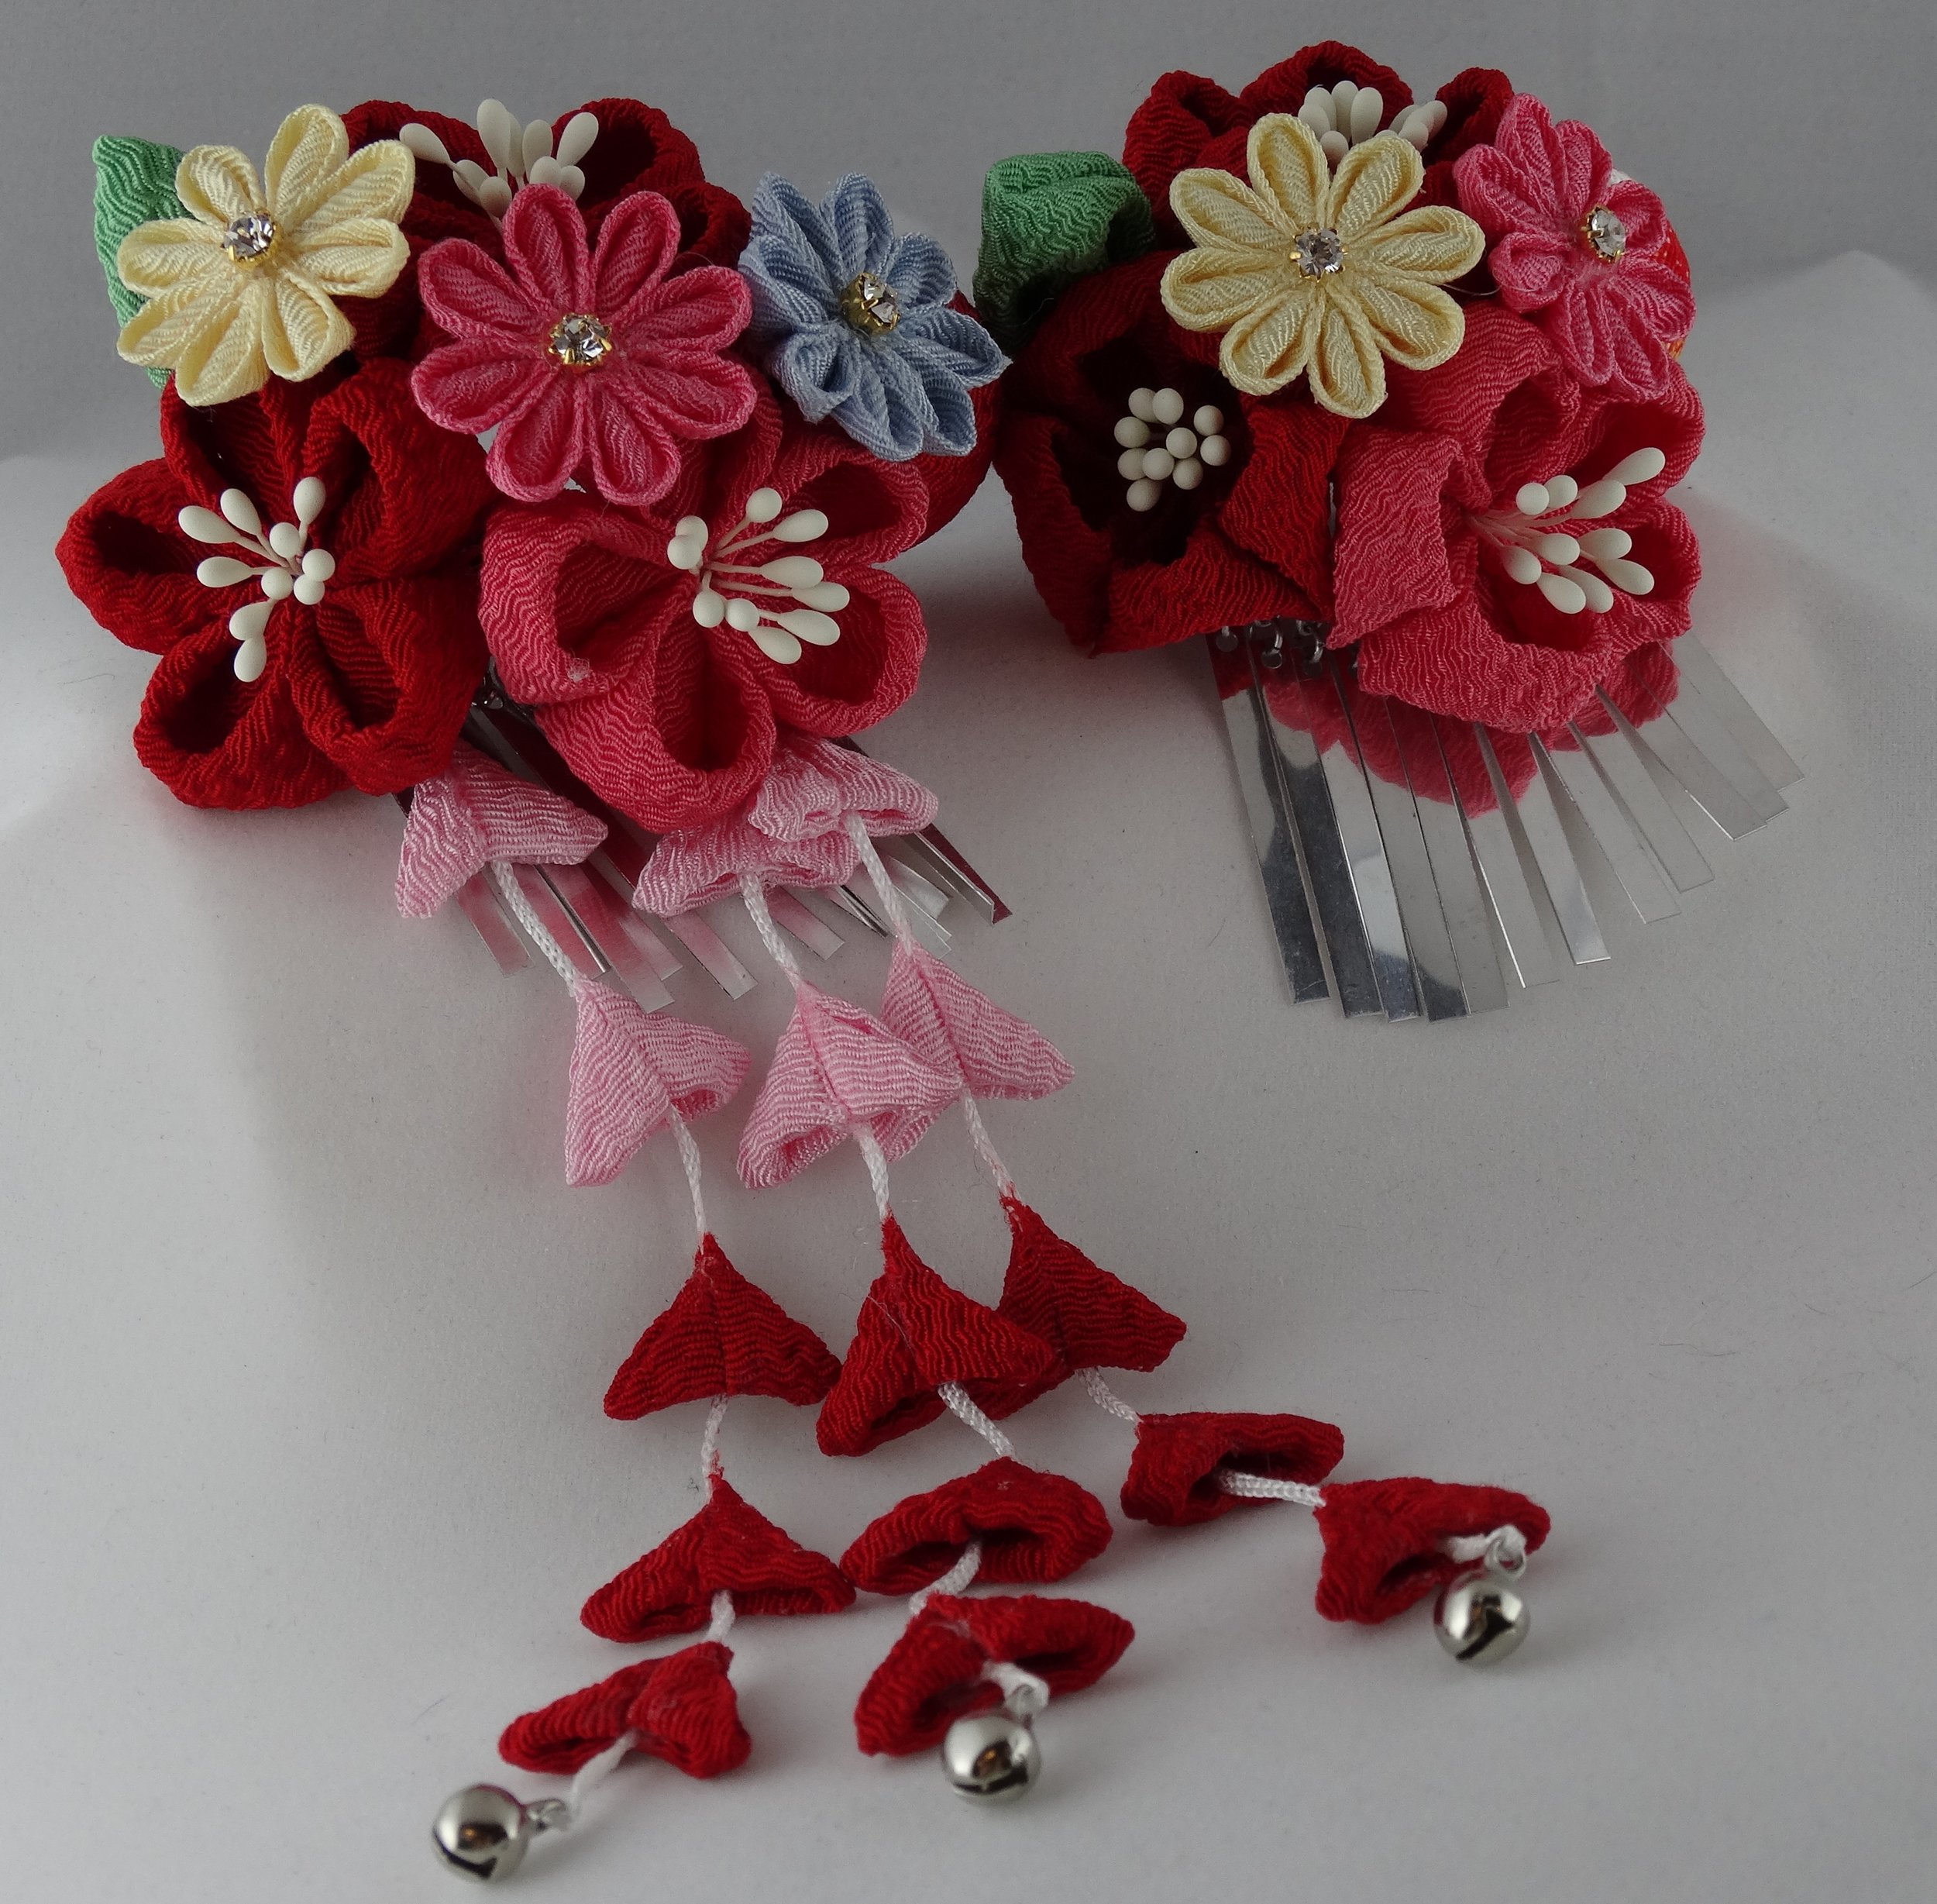 Traditional Japanese Women's Ornaments - Culture - Japan Travel